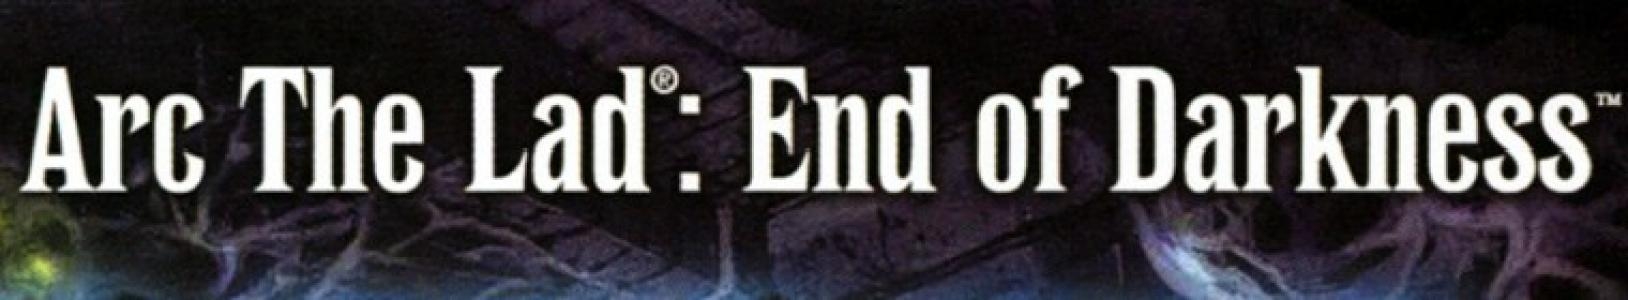 Arc the Lad: End of Darkness banner